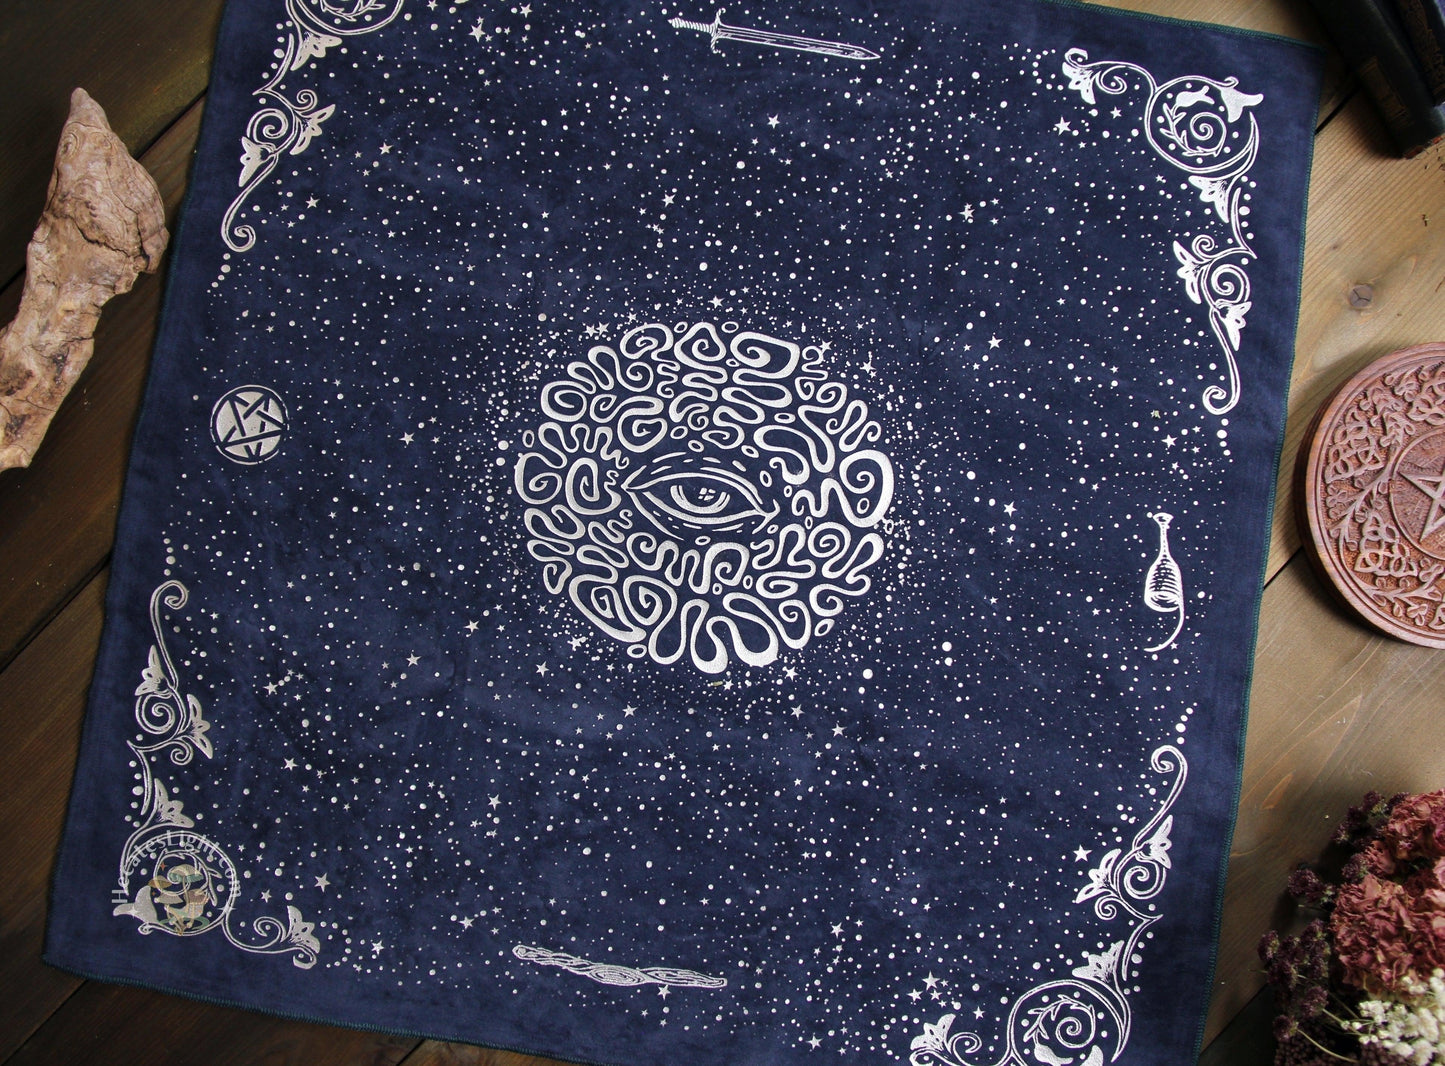 Cosma/Prisma Visions Tarot Altar Cloth James R. Eads altar, altar blue, calgary, canada, canada cloth, cosma gift, gold, oracle, oracle deck, placemat, prisma visions, silver, suede, tarot, teal, witchy gift metaphysical occult supplies witchy hecateslight.com witchcraft cottagecore witch gifts